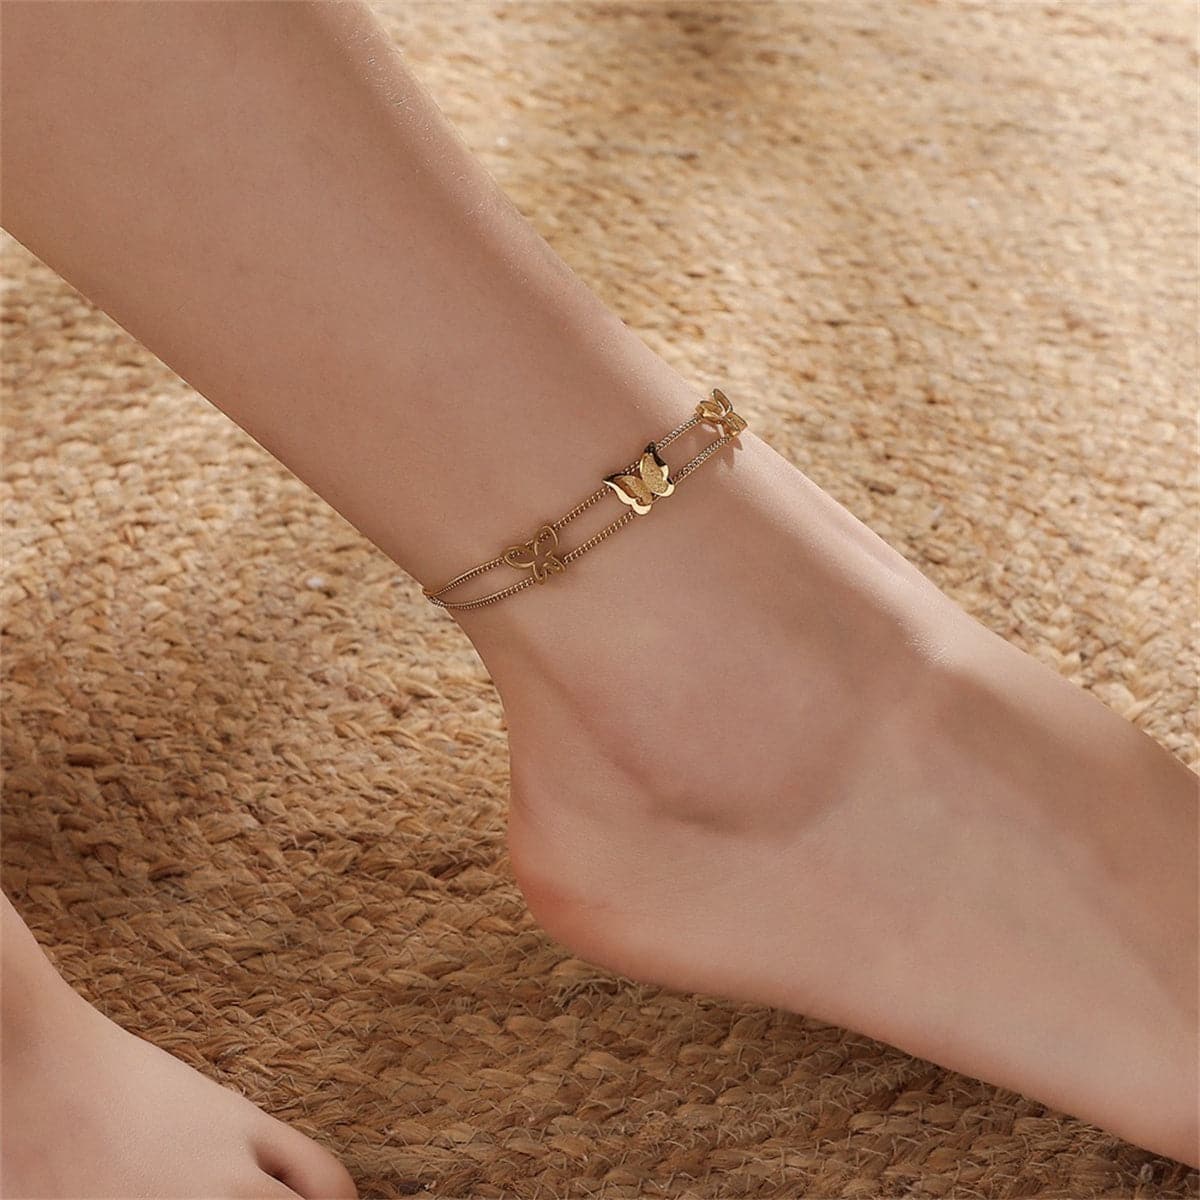 18K Gold-Plated Butterfly Layered Anklet